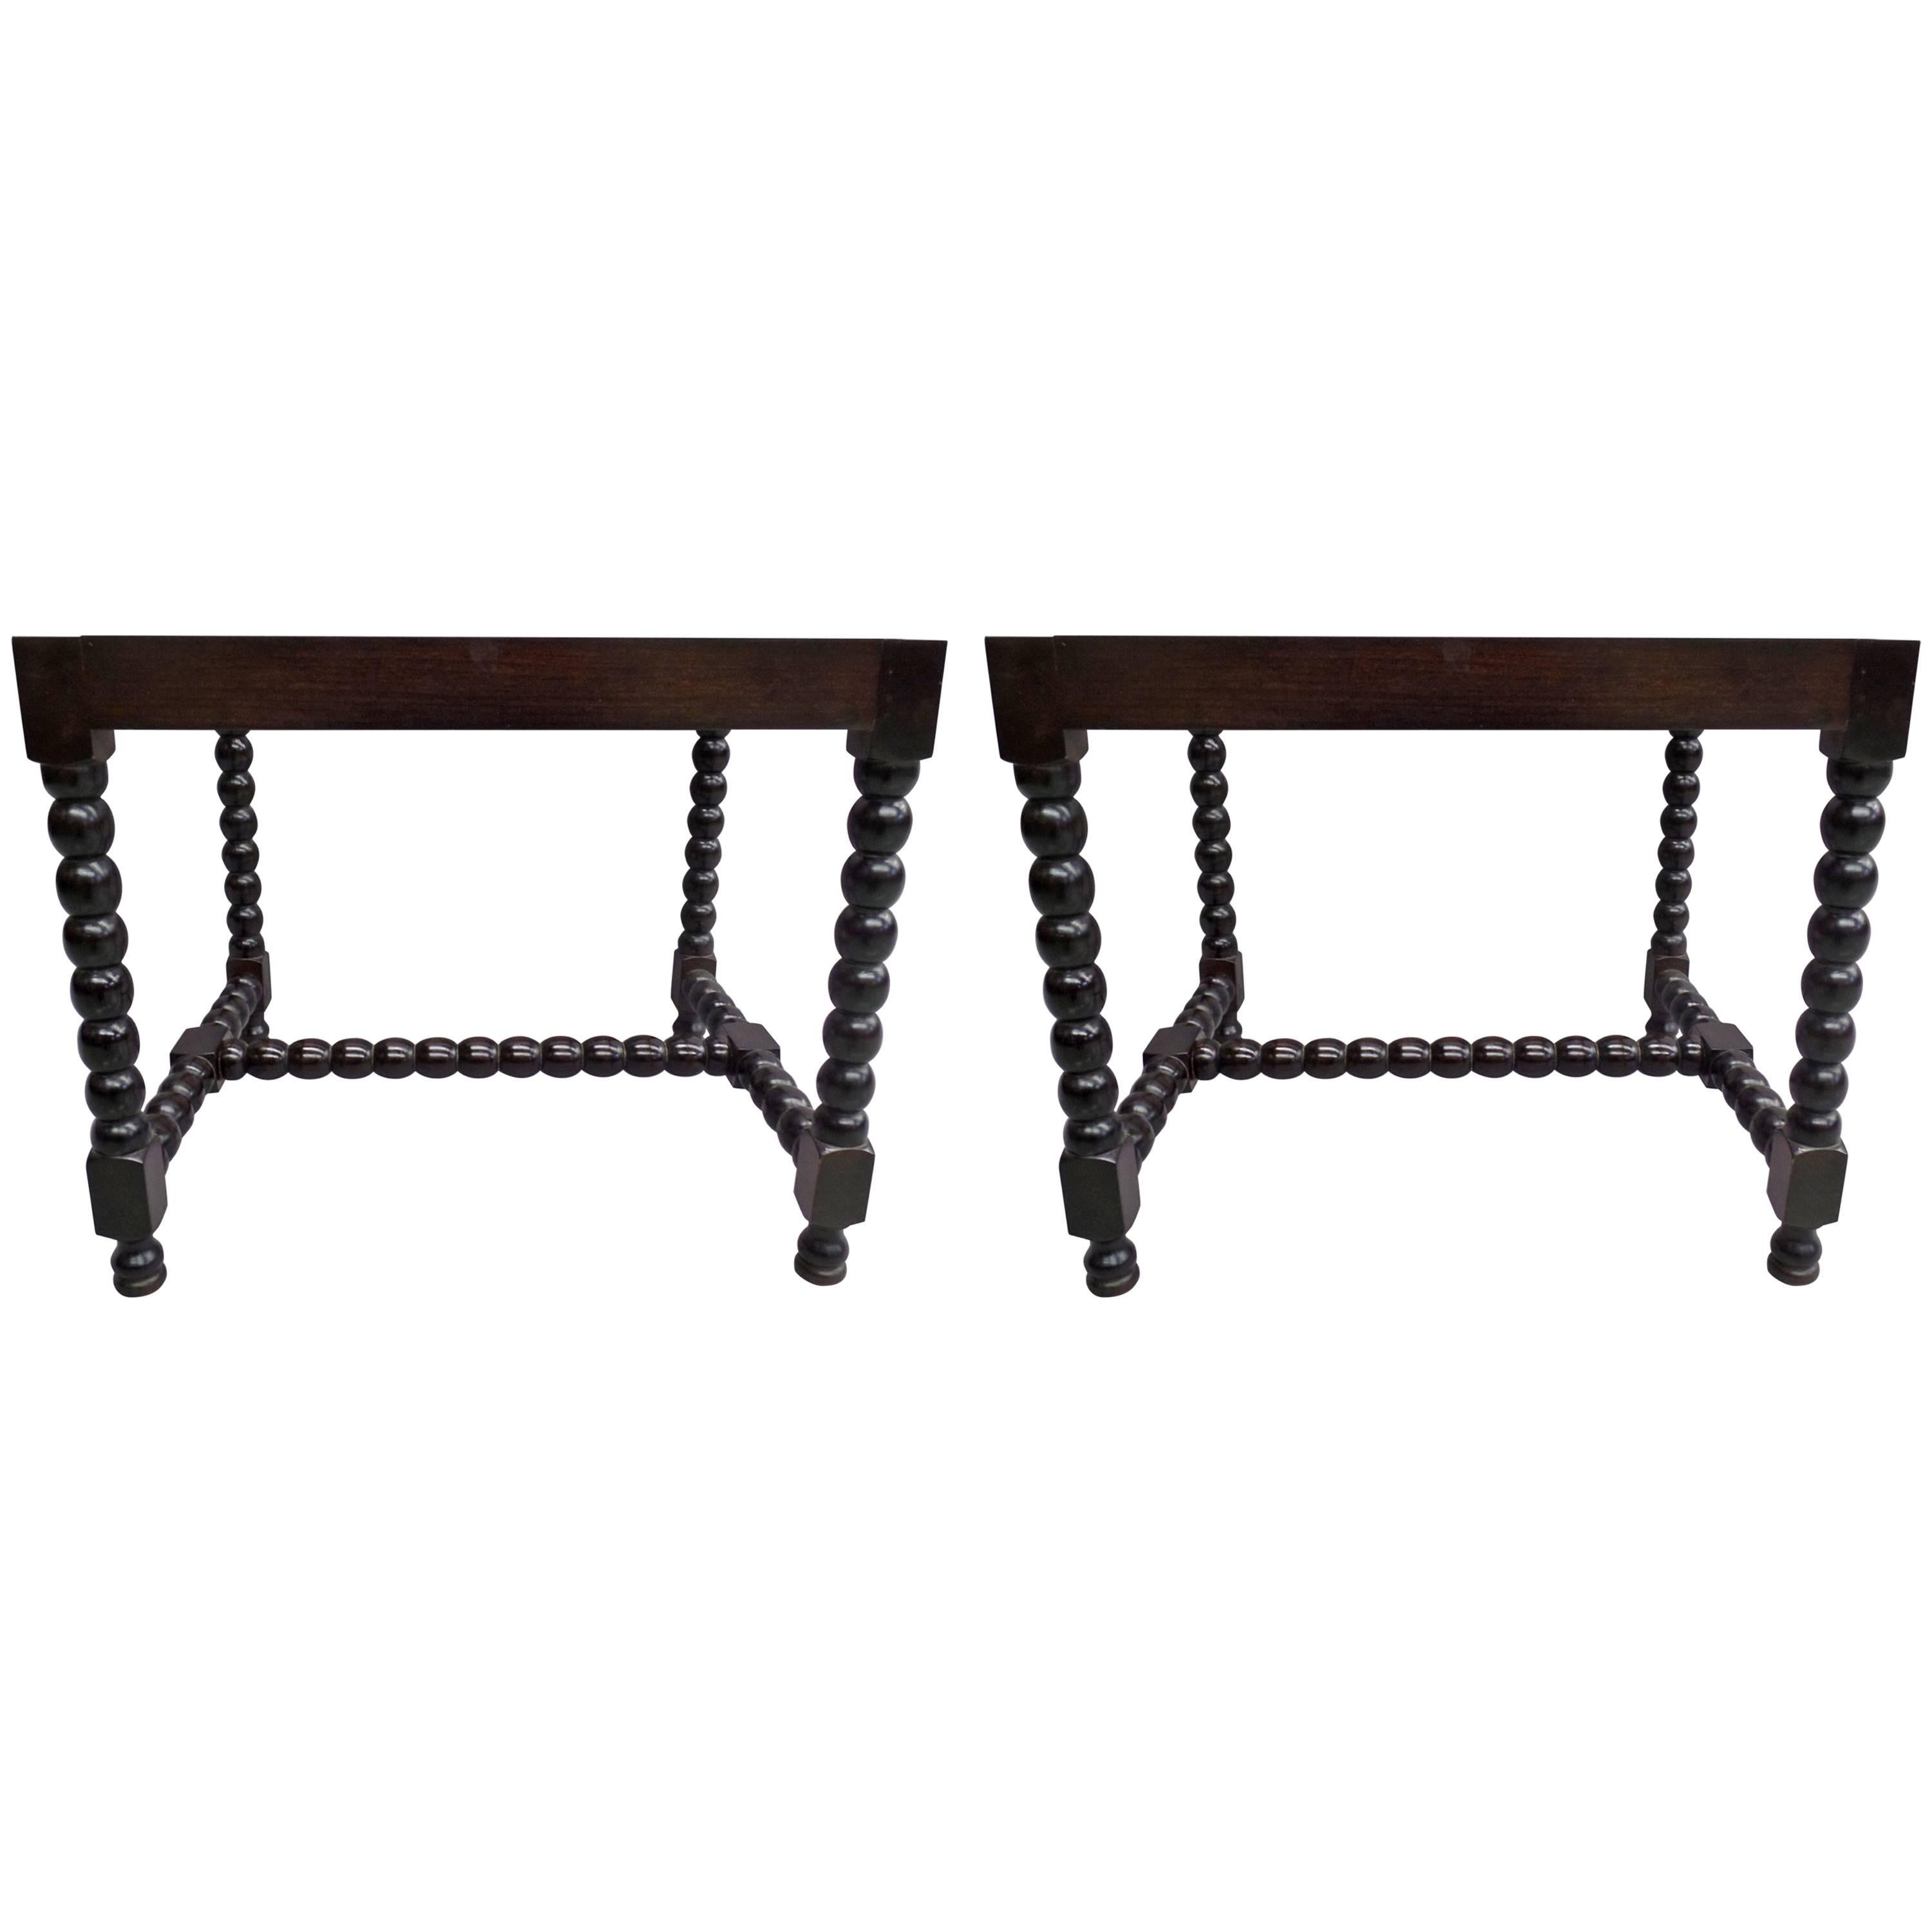 Pair of Sober Modern Neoclassical Carved Wood Stacked Ball Benches / Stools